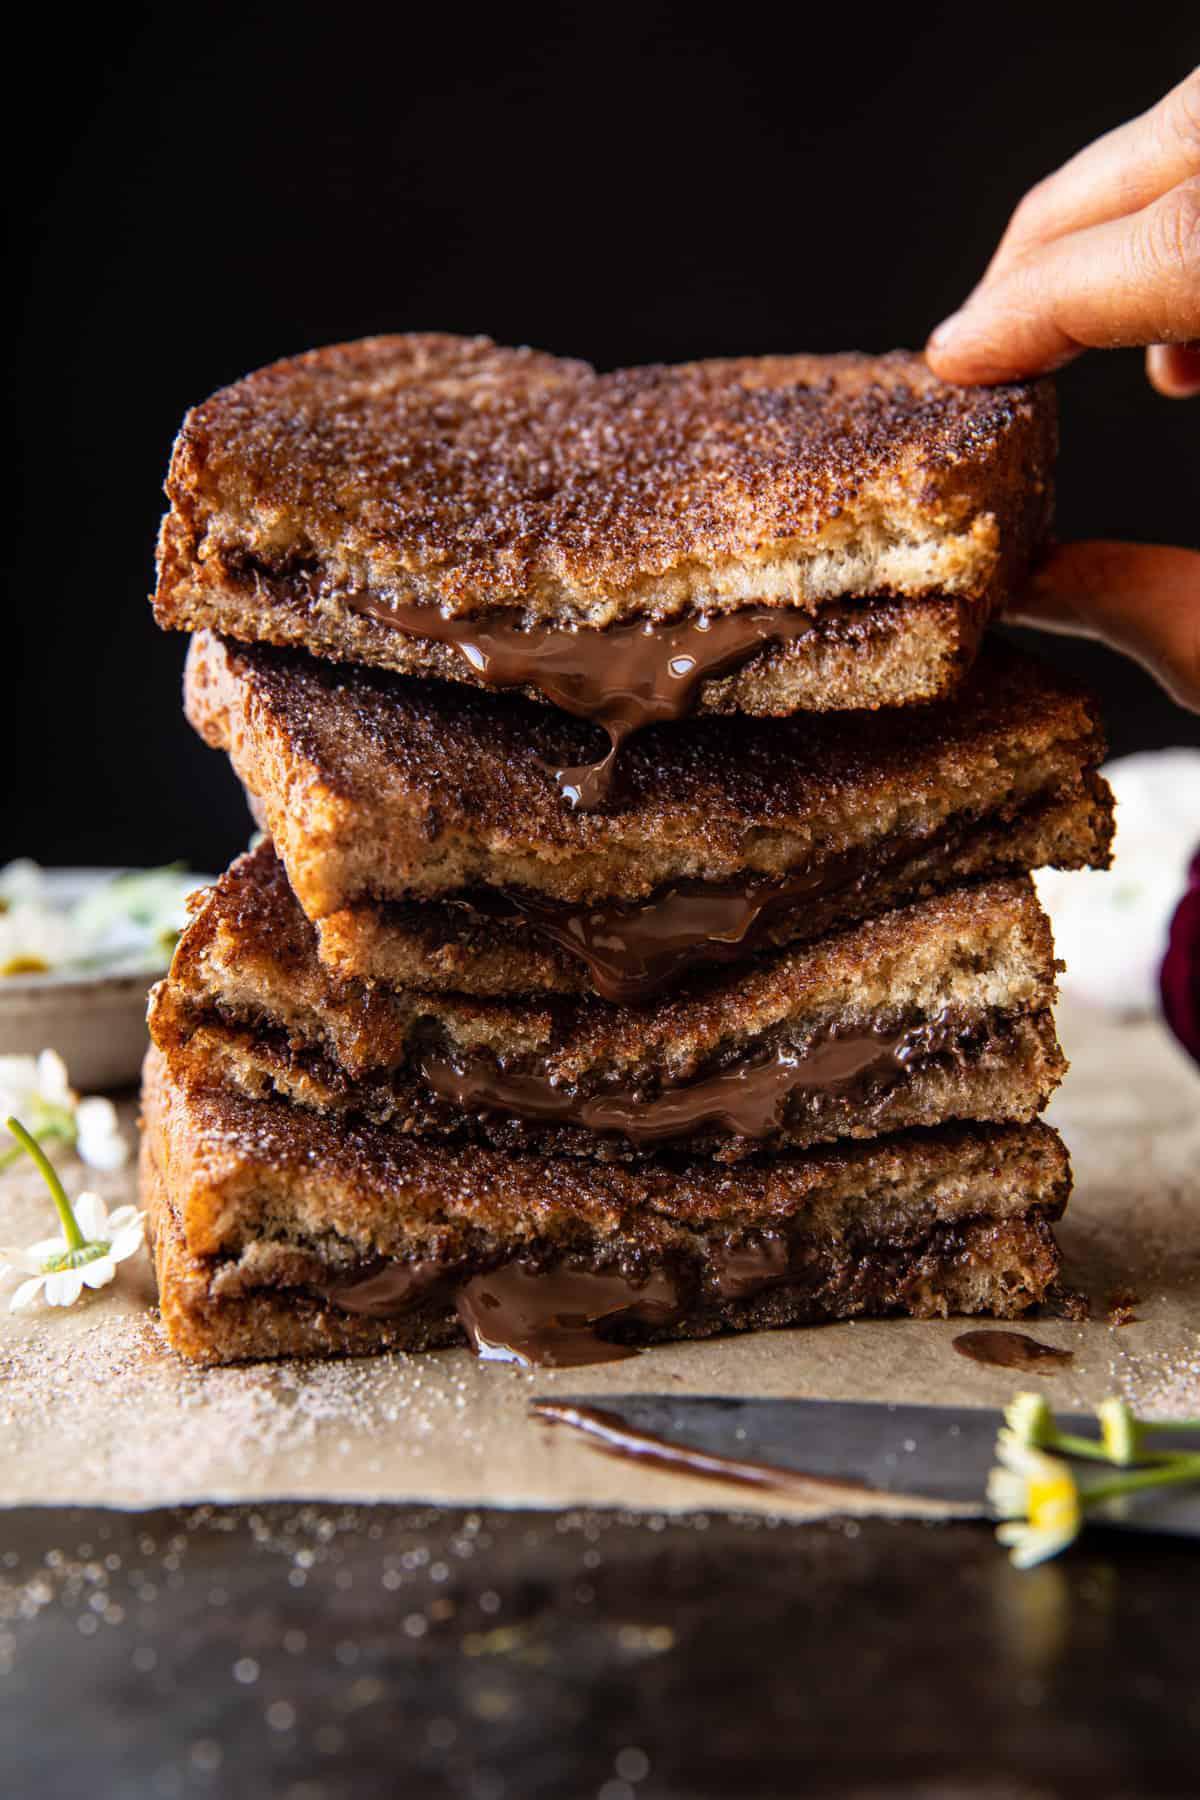 If you're looking for something that will go a little bit easier on your stomach, consider this toast recipe! Not only is cinnamon sugar toast a classic that has us feeling all kinds of nostalgic, but the addition of dark chocolate gives it a grown-up spin. (via <strong><a href="https://www.halfbakedharvest.com/5-minute-grilled-cinnamon-toast-with-chocolate/">Half Baked Harvest</a></strong>)